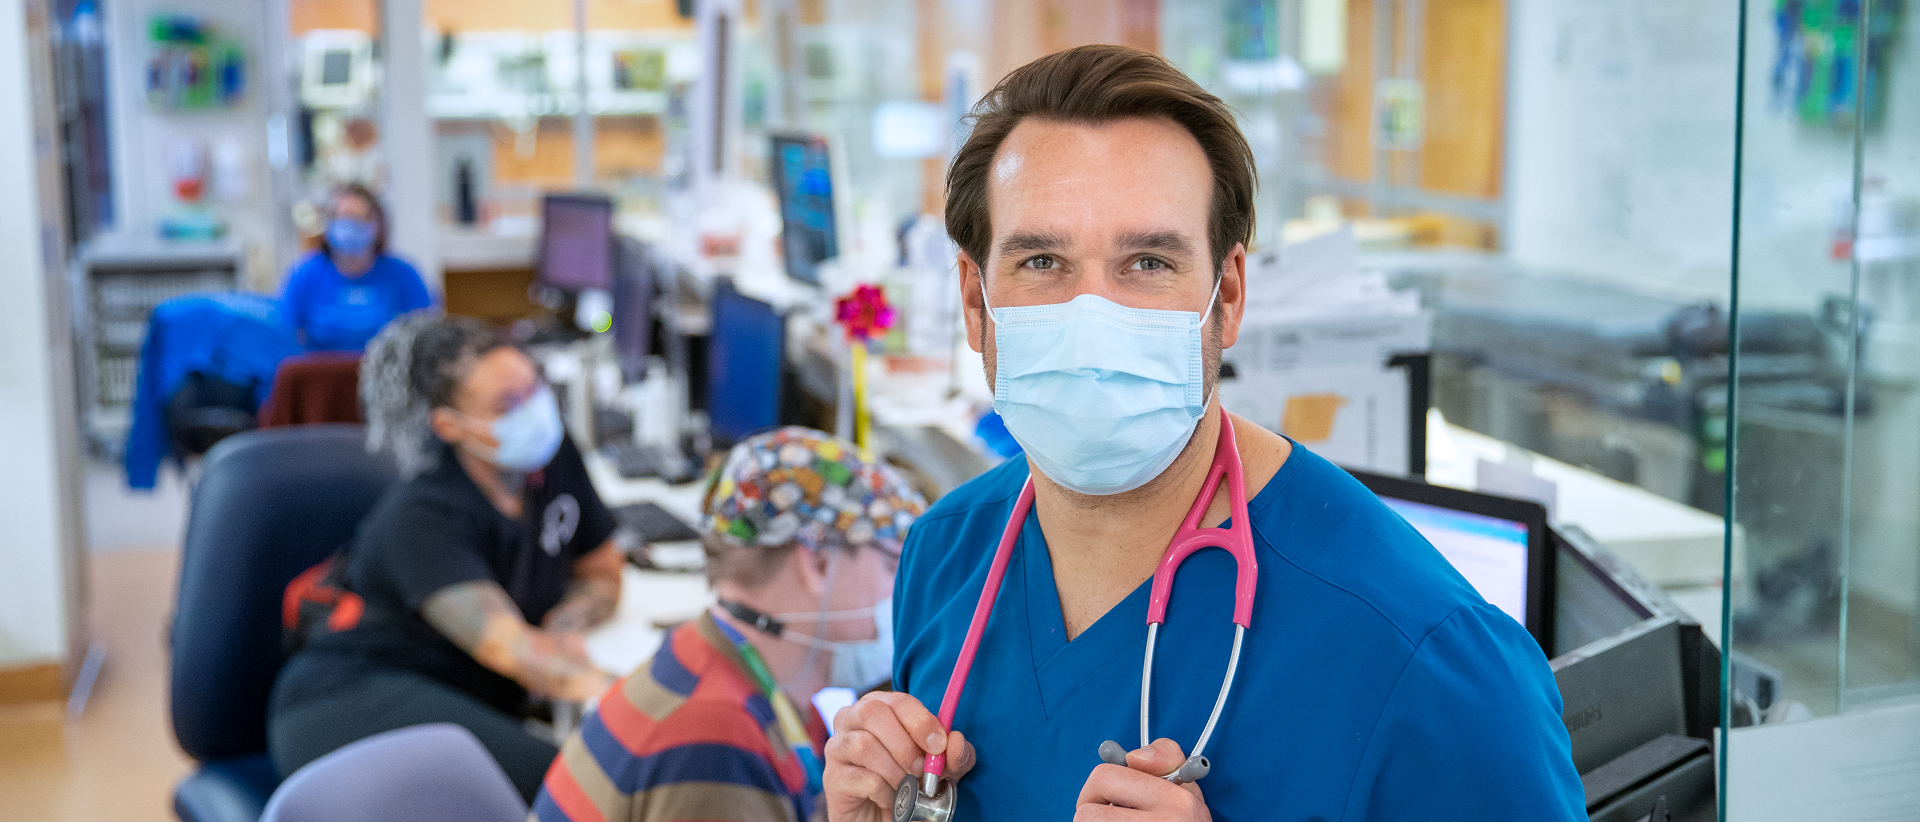 Man wearing scrubs, a surgical mask and a stethoscope around his neck stands in a clinical area.